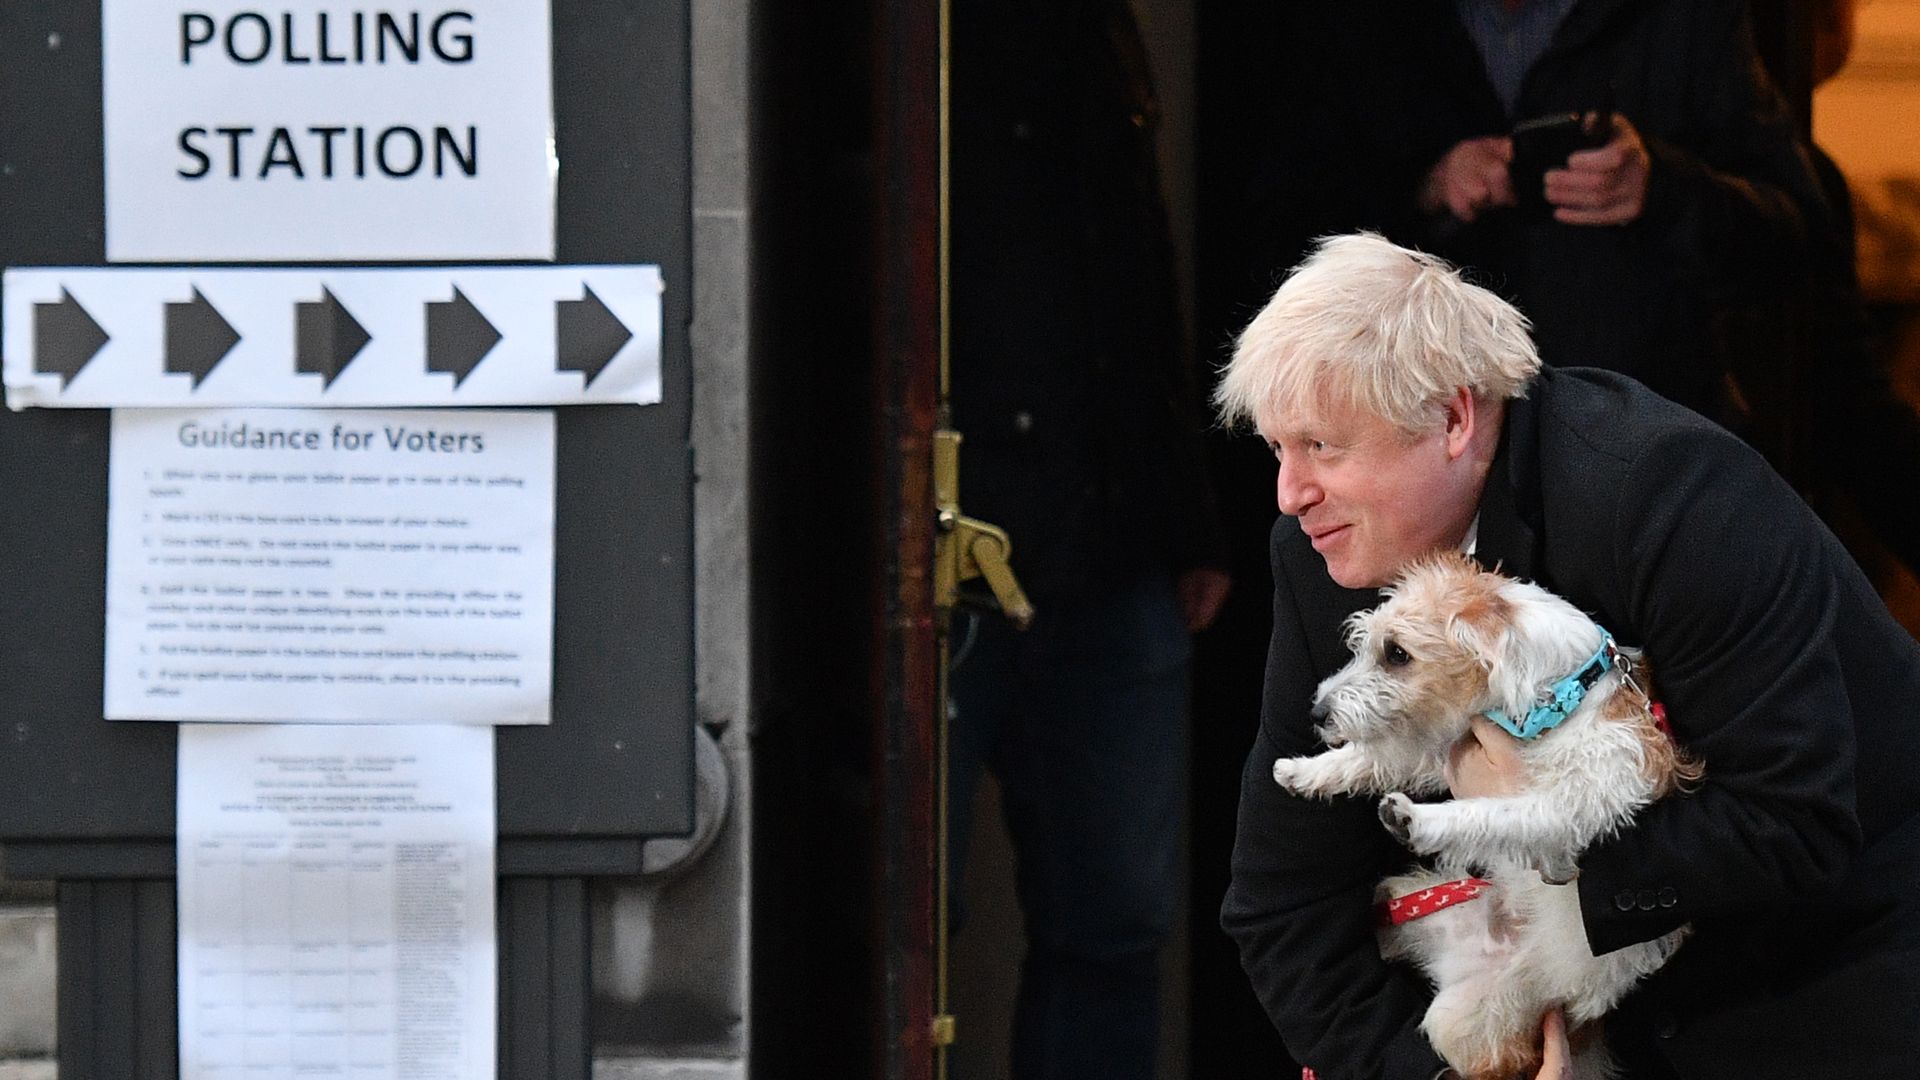 Britain's Prime Minister Boris Johnson poses with his dog Dilyn as he leaves from a Polling Station